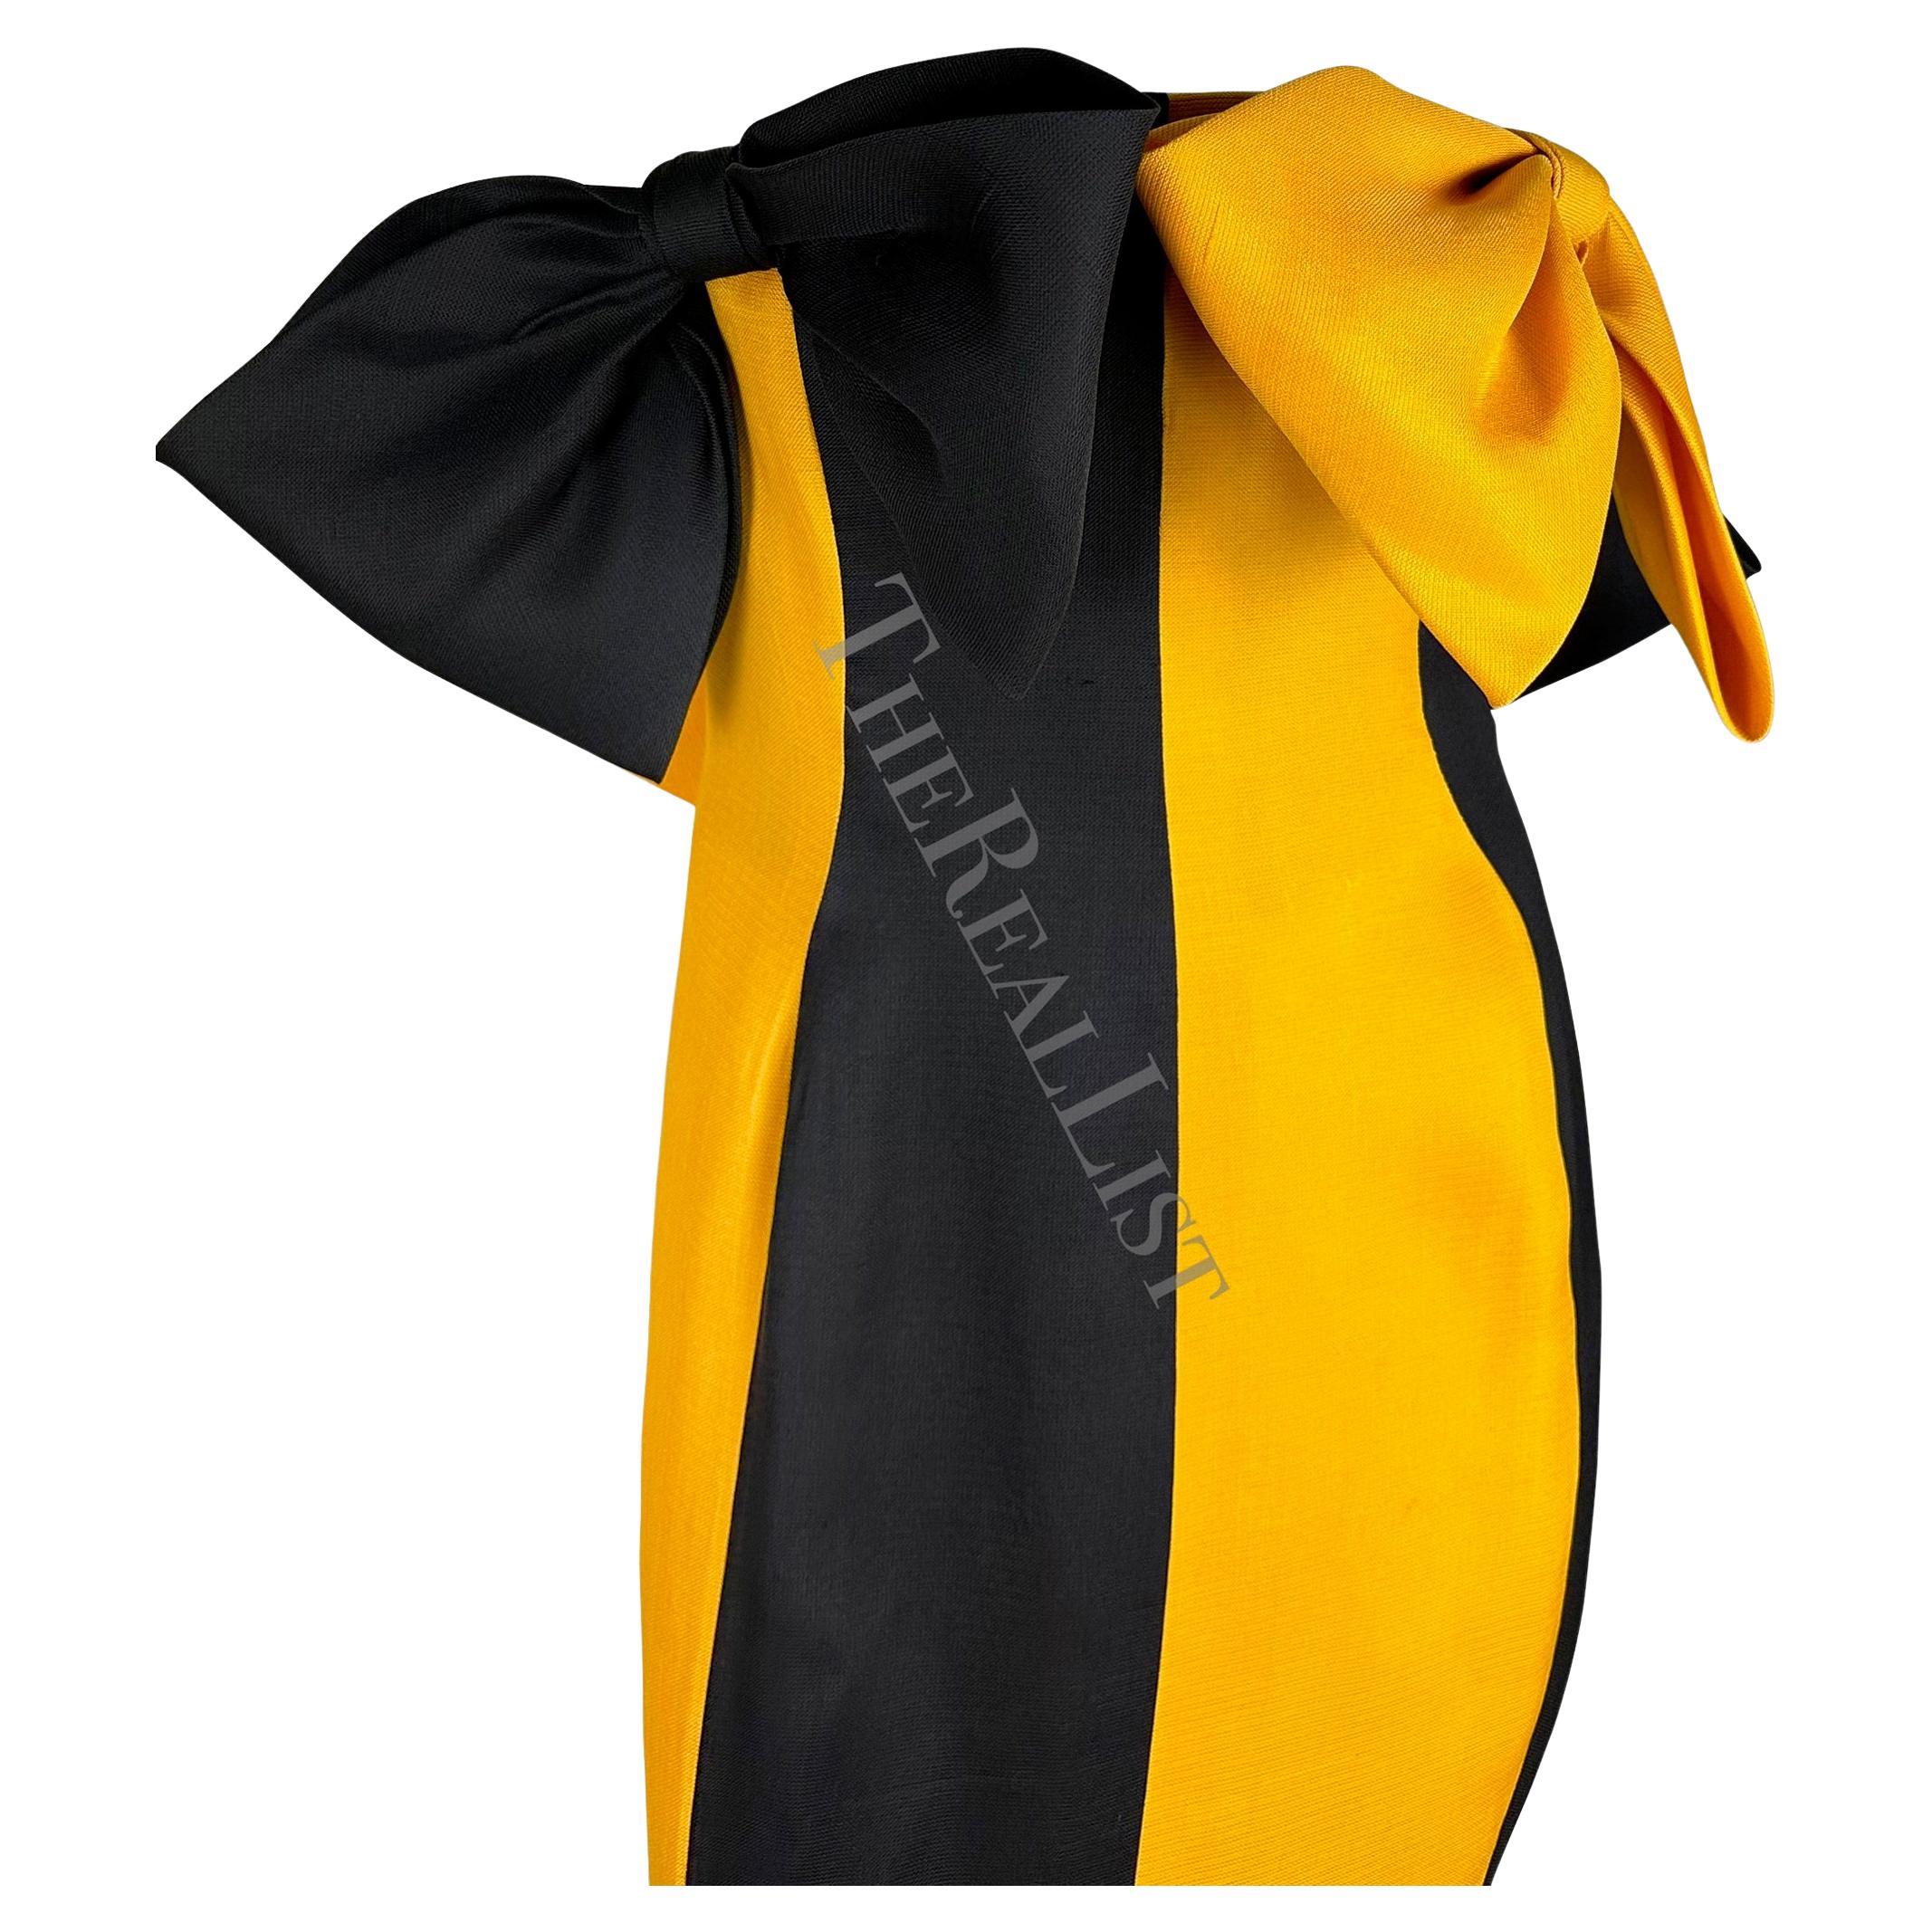 S/S 1987 Givenchy Haute Couture Runway Yellow Black Bow Trumpet Flare Gown In Excellent Condition For Sale In Philadelphia, PA